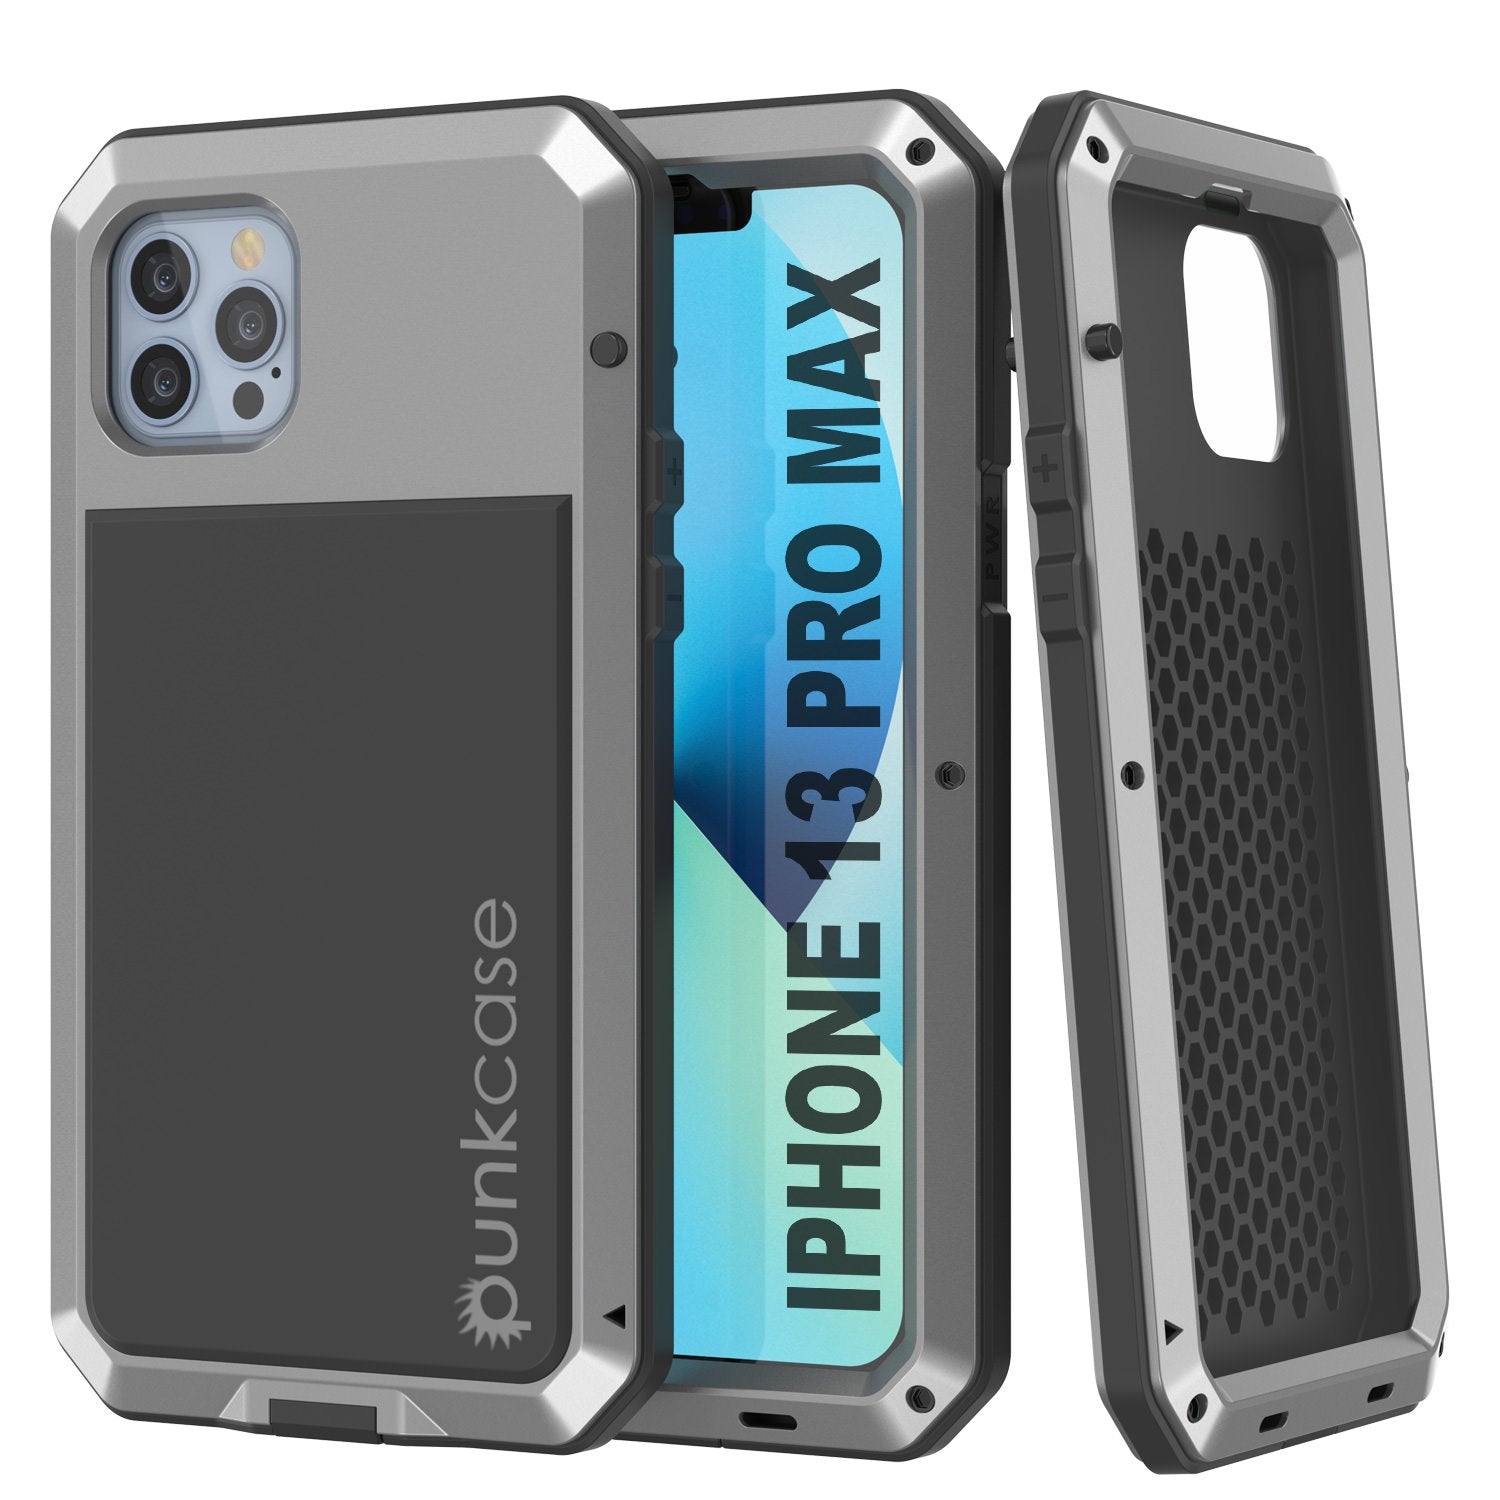 iPhone 13 Pro Max Metal Case, Heavy Duty Military Grade Armor Cover [shock proof] Full Body Hard [Silver]